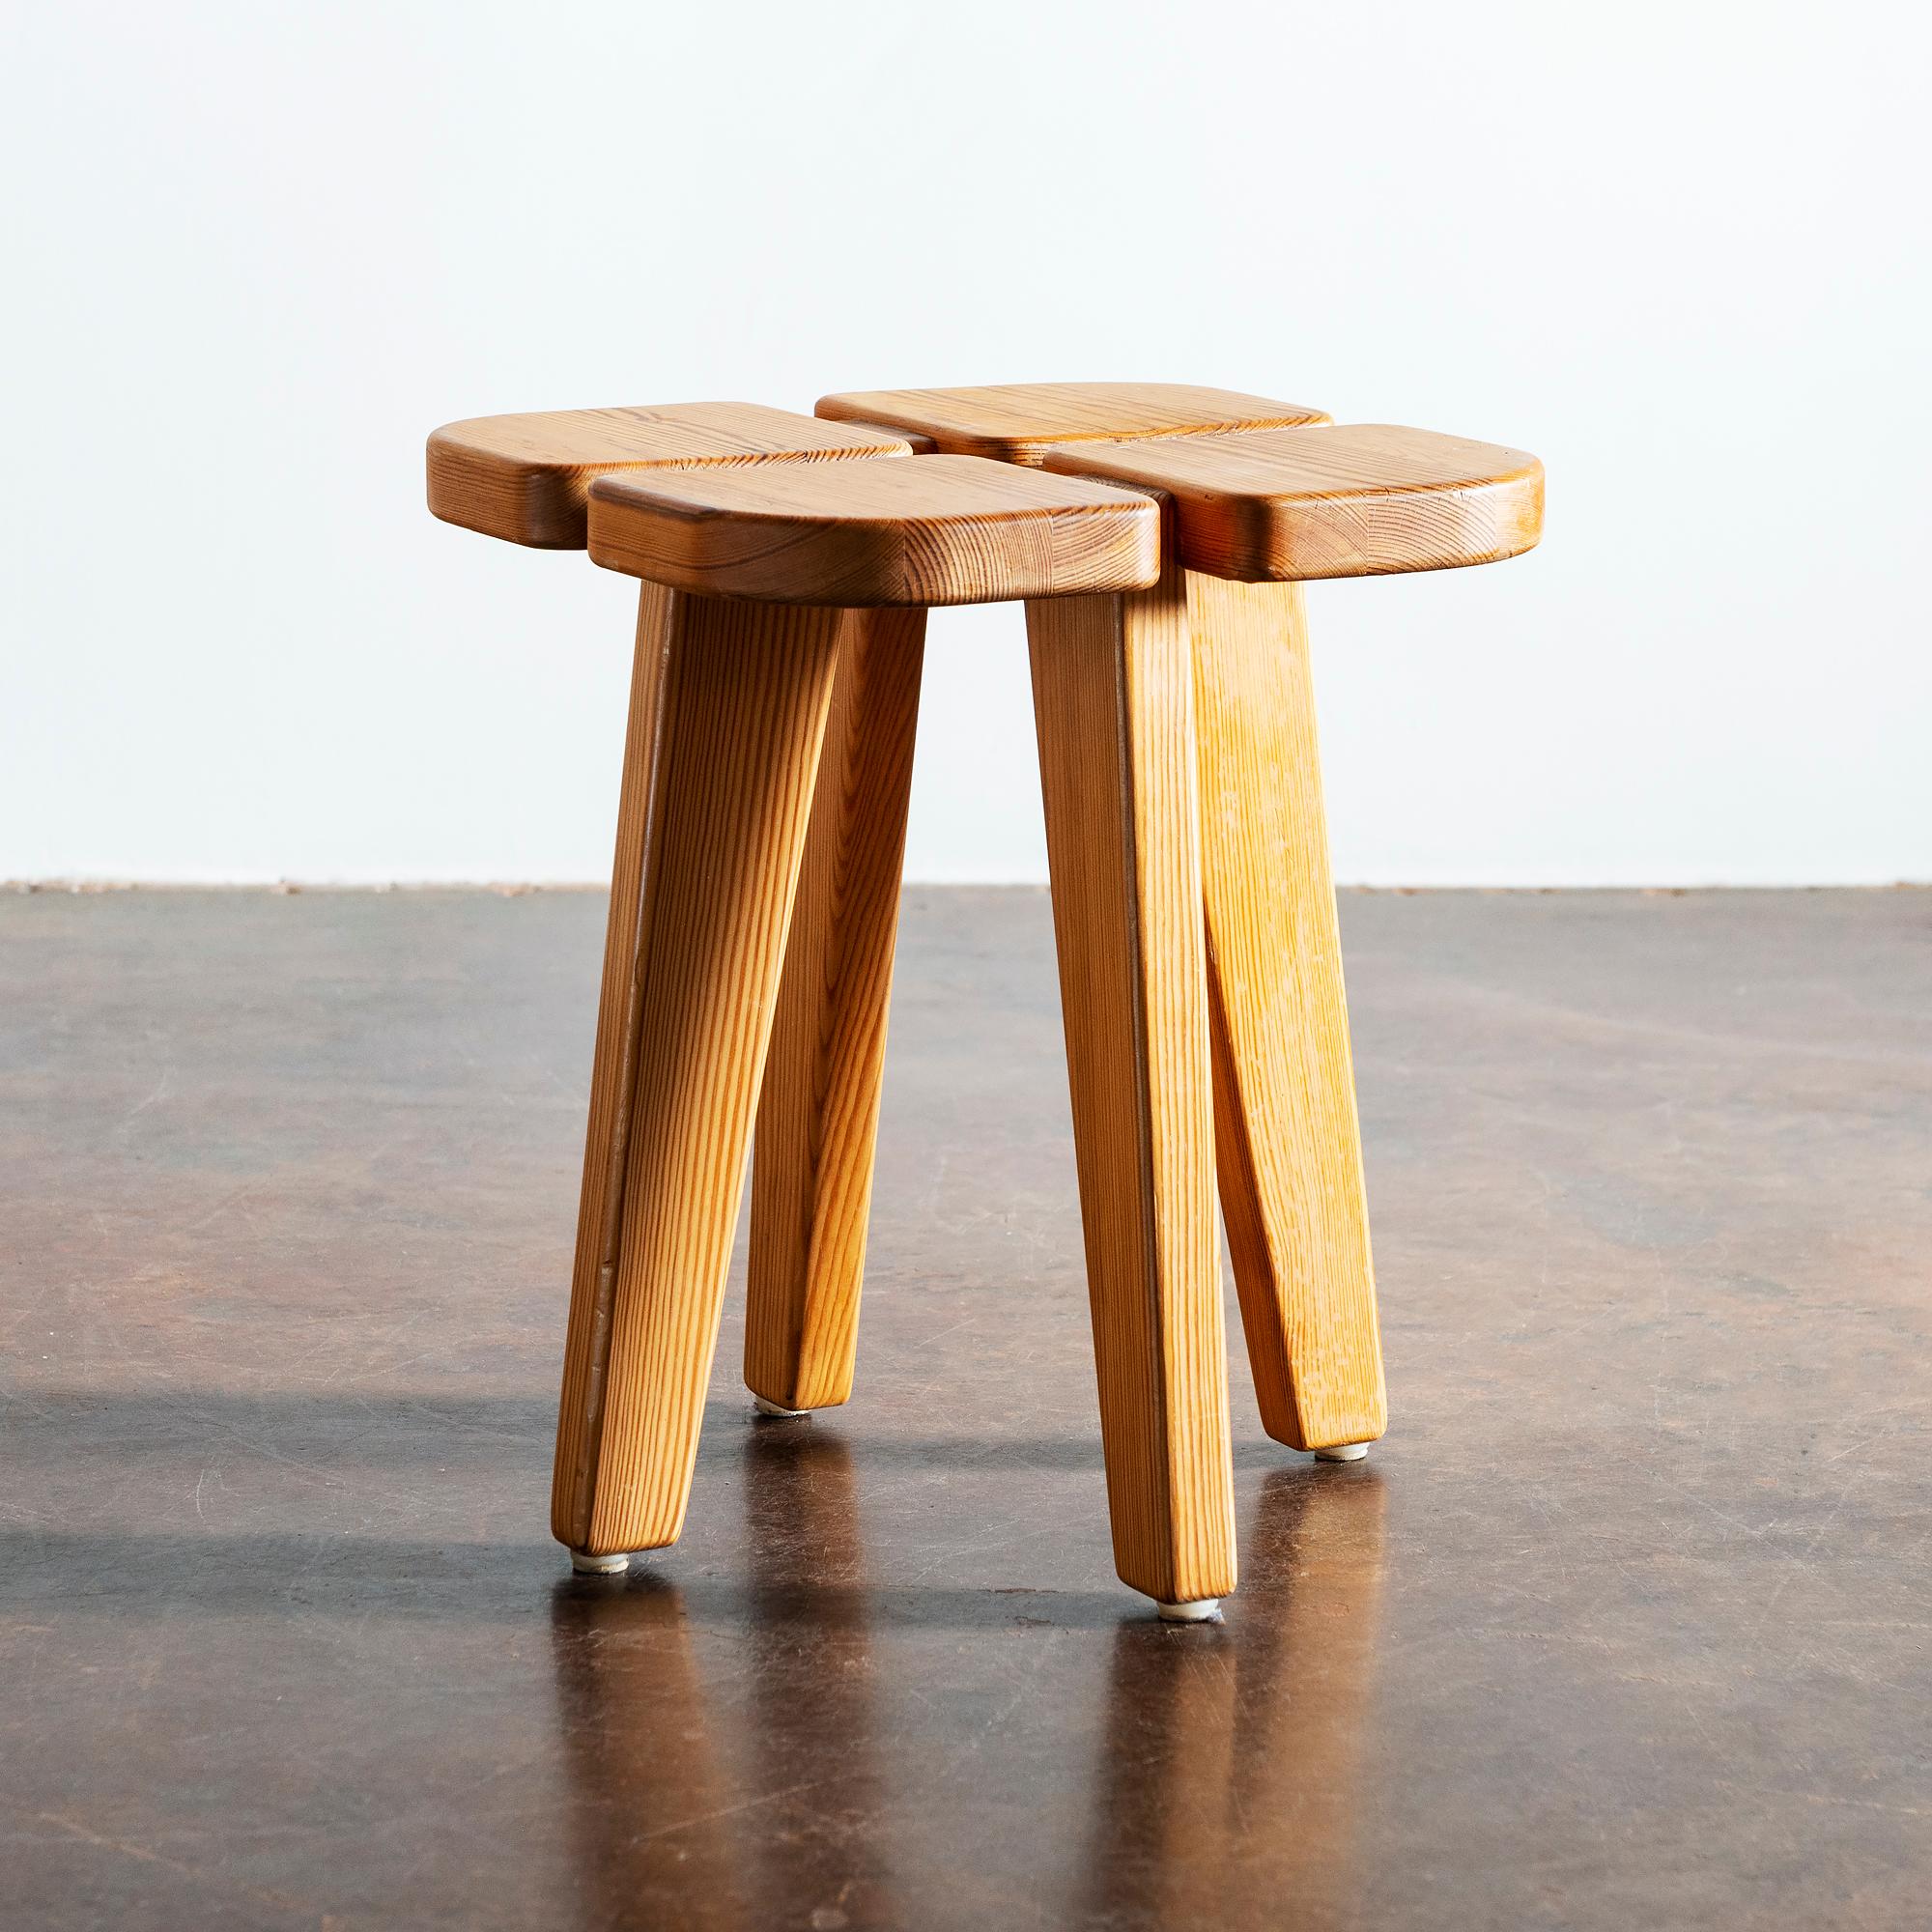 Elegant pinewood stools with cloverleaf central opening, marked 262 Apila. Finland, 1960s.